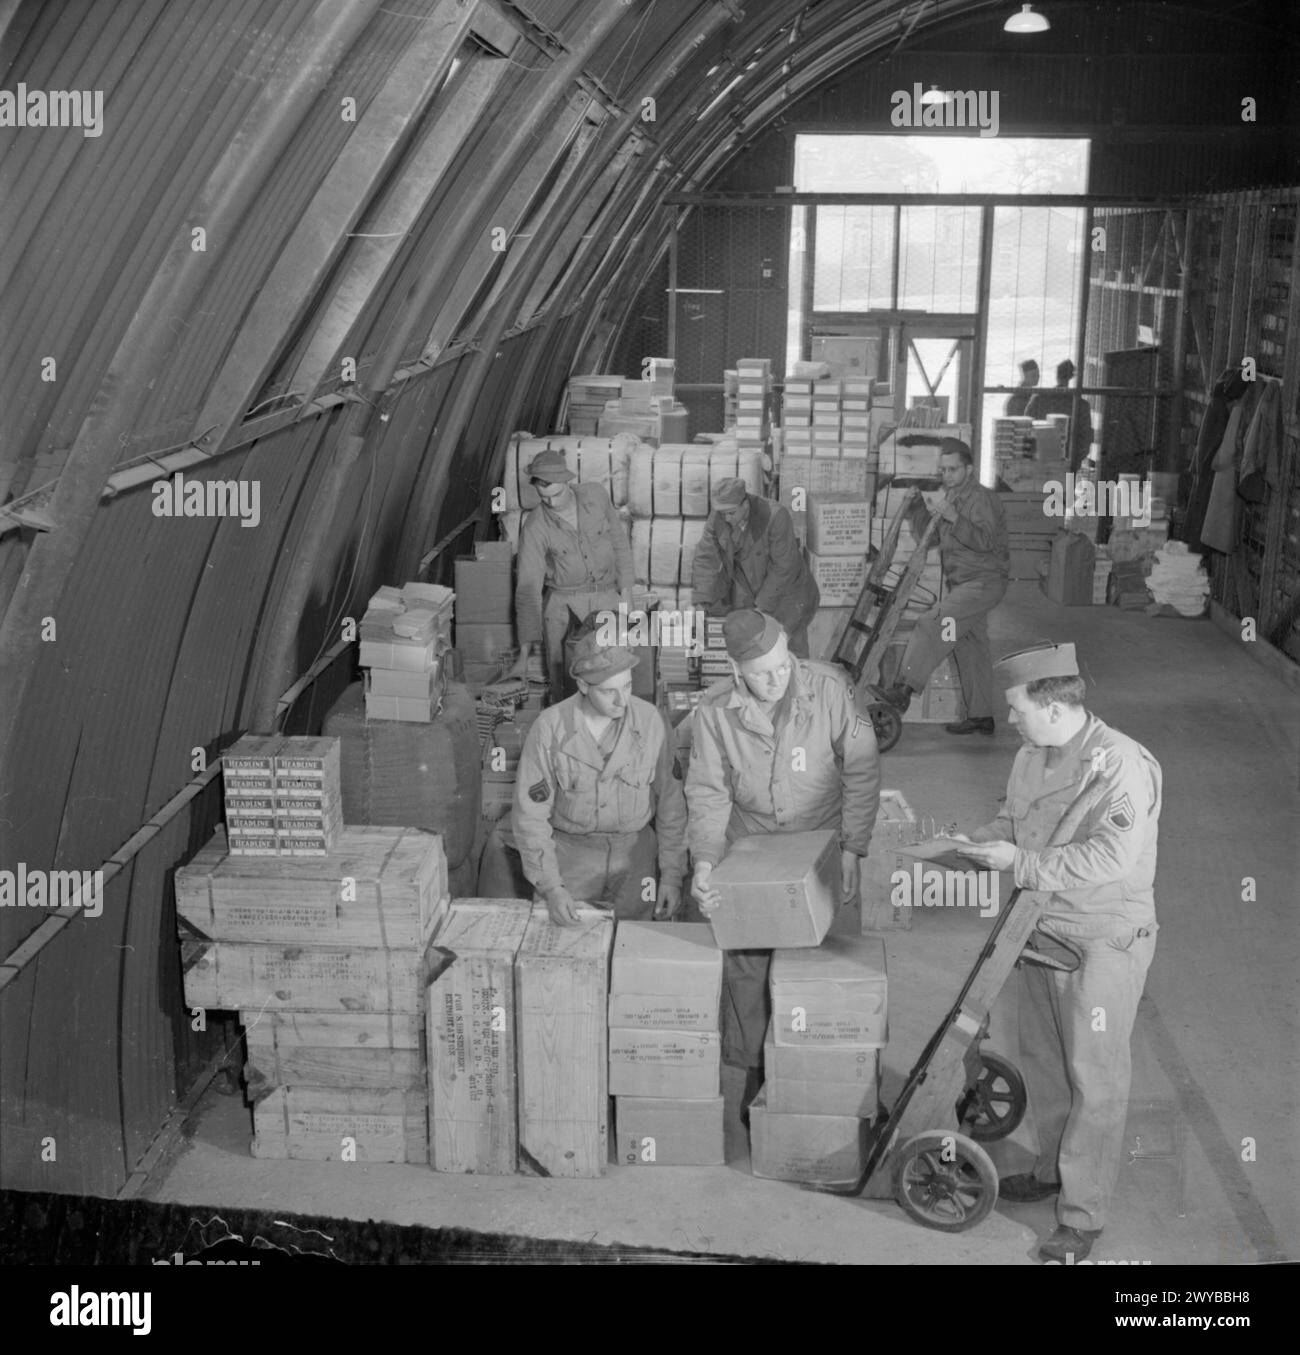 BRITAIN SUPPLIES US ARMY STORE: AMERICANS IN BRITAIN, 1943 - GIs at work at an American Army store, somewhere in Britain. This particular area of the store supplies goods for Post Exchanges (also known as PXs), including candles, chocolate, shaving cream, toothpaste, batteries, ink, writing paper, shoe polish and playing cards. Making up a load for dispatch in the foreground are (left to right): T/5 Joe Brethauer (of Rote 2, Box 245, Fort Lupton, Colorado), Pfc Bernard Hanson (of 148 Magnolia Avenue, Kearny, New Jersey) and Staff Sergeant Robert McKenna of Big Bend, Wisconsin. , Stock Photo